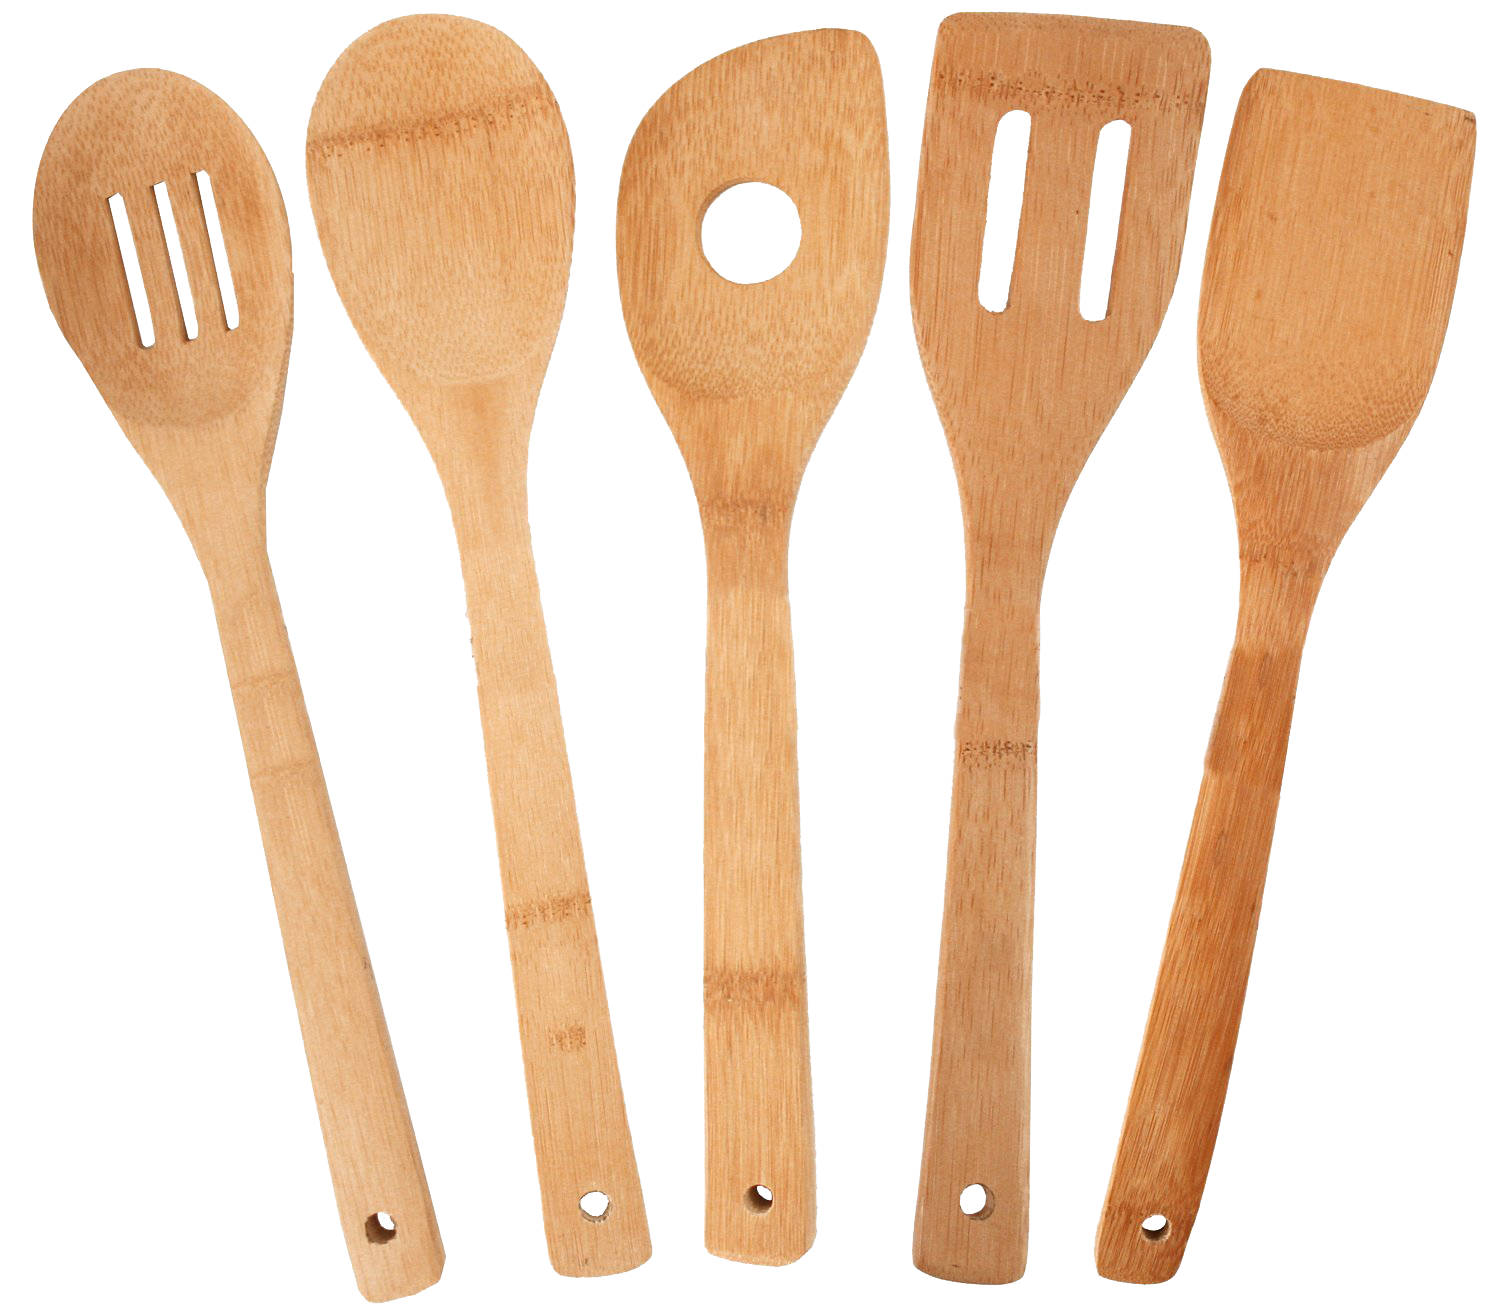 Cooking Tools Png - Download Cooking Tools Png Images Transparent Gallery. Advertisement, Transparent background PNG HD thumbnail